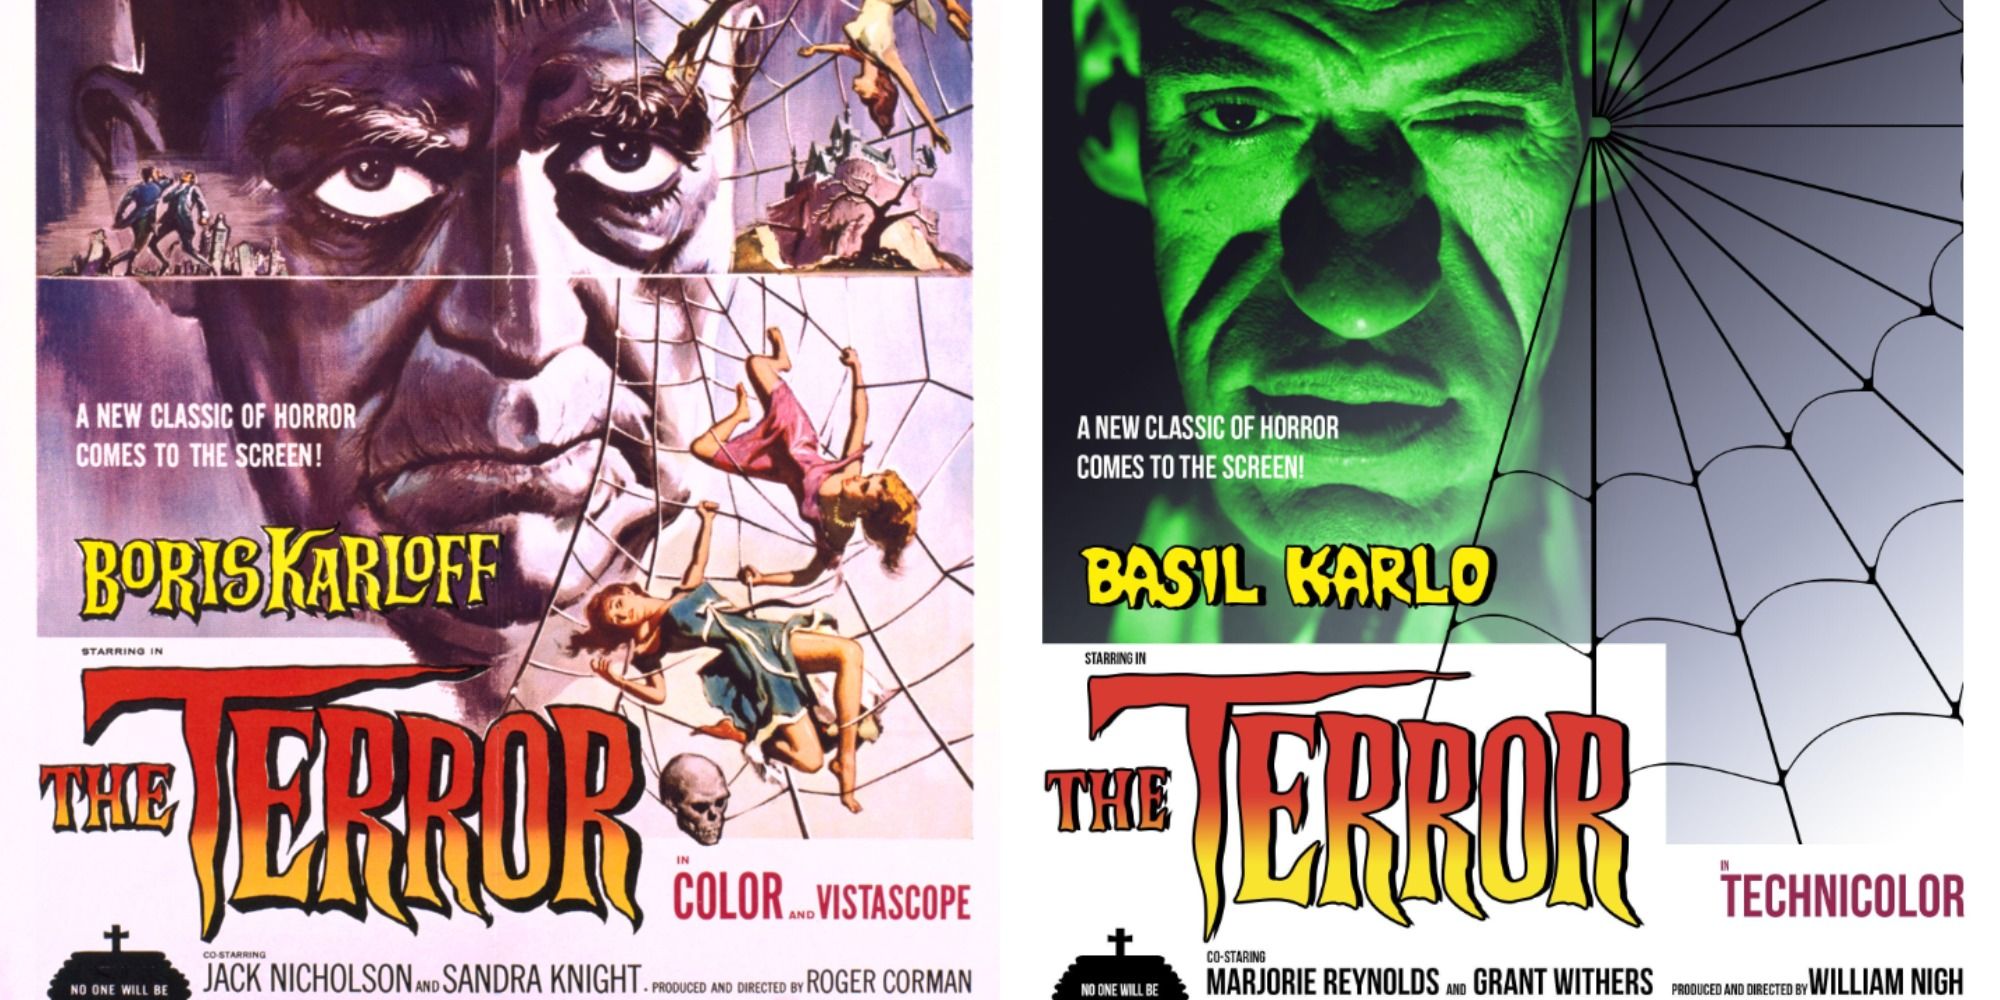 Split image of the poster for The Terror and the parody poster for The Terror starring Clayface